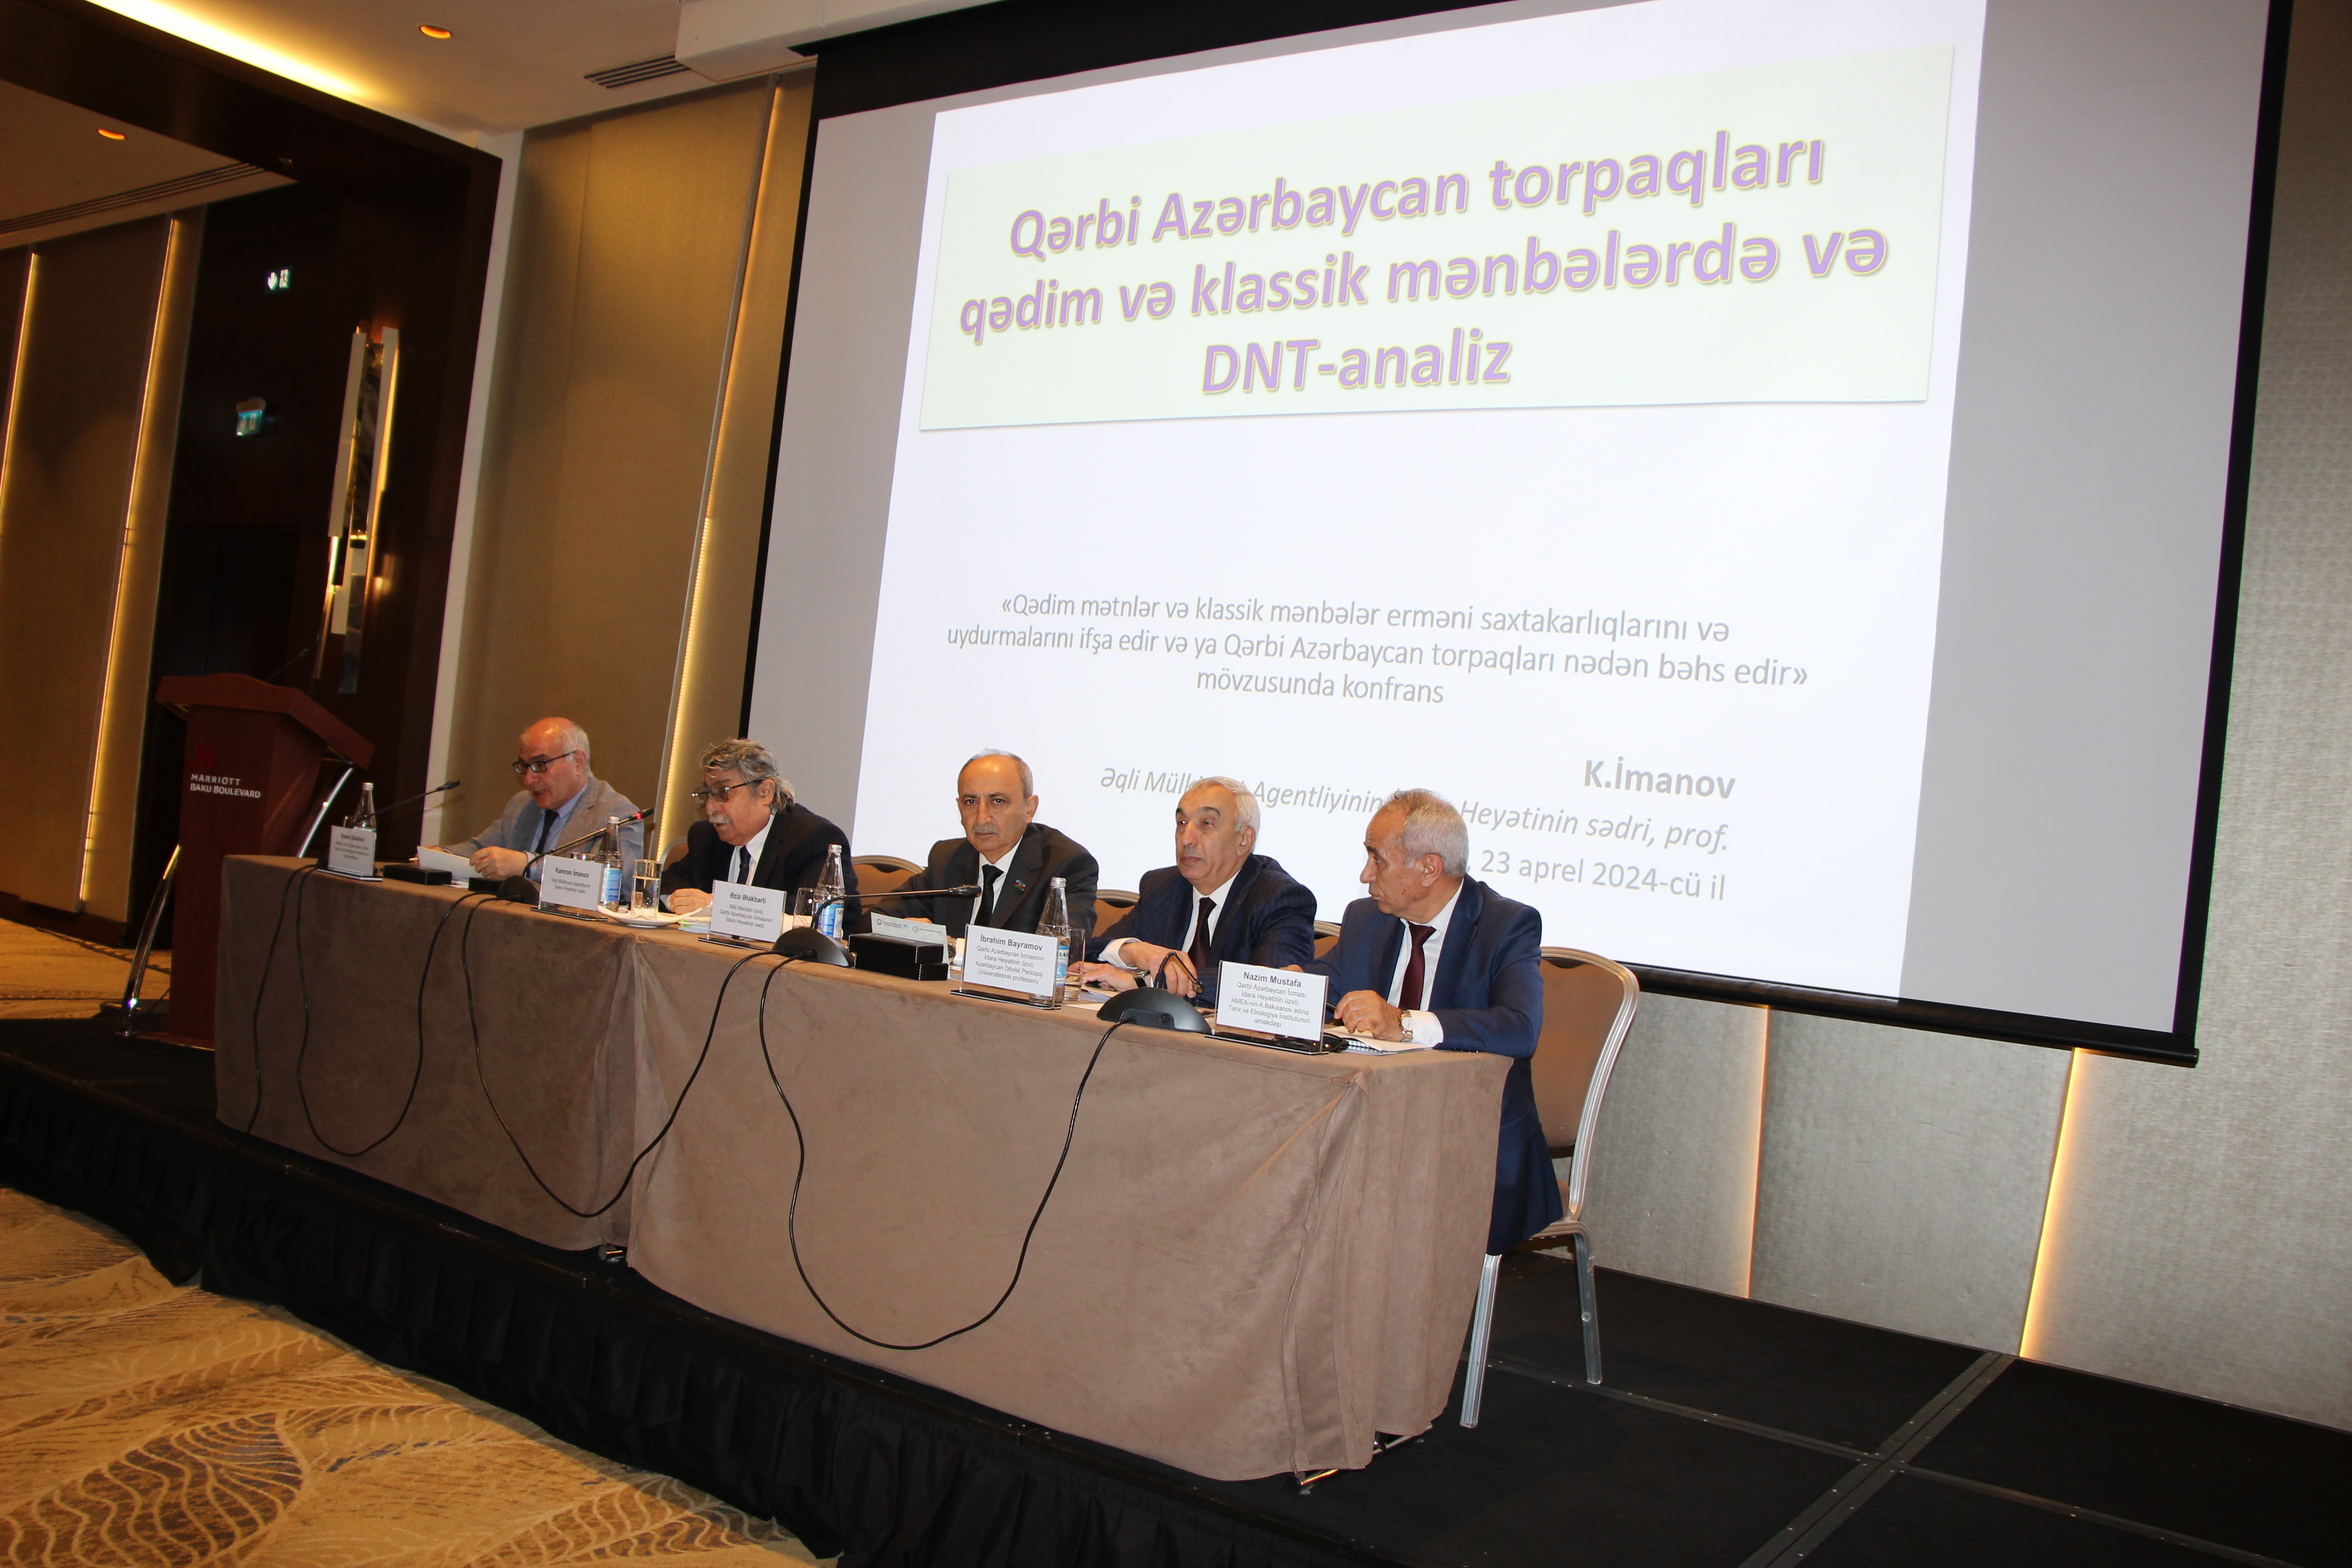 A conference on the topic "Ancient texts and classical sources expose armenian frauds and fictions or what the lands of Western Azerbaijan are telling about” was held.